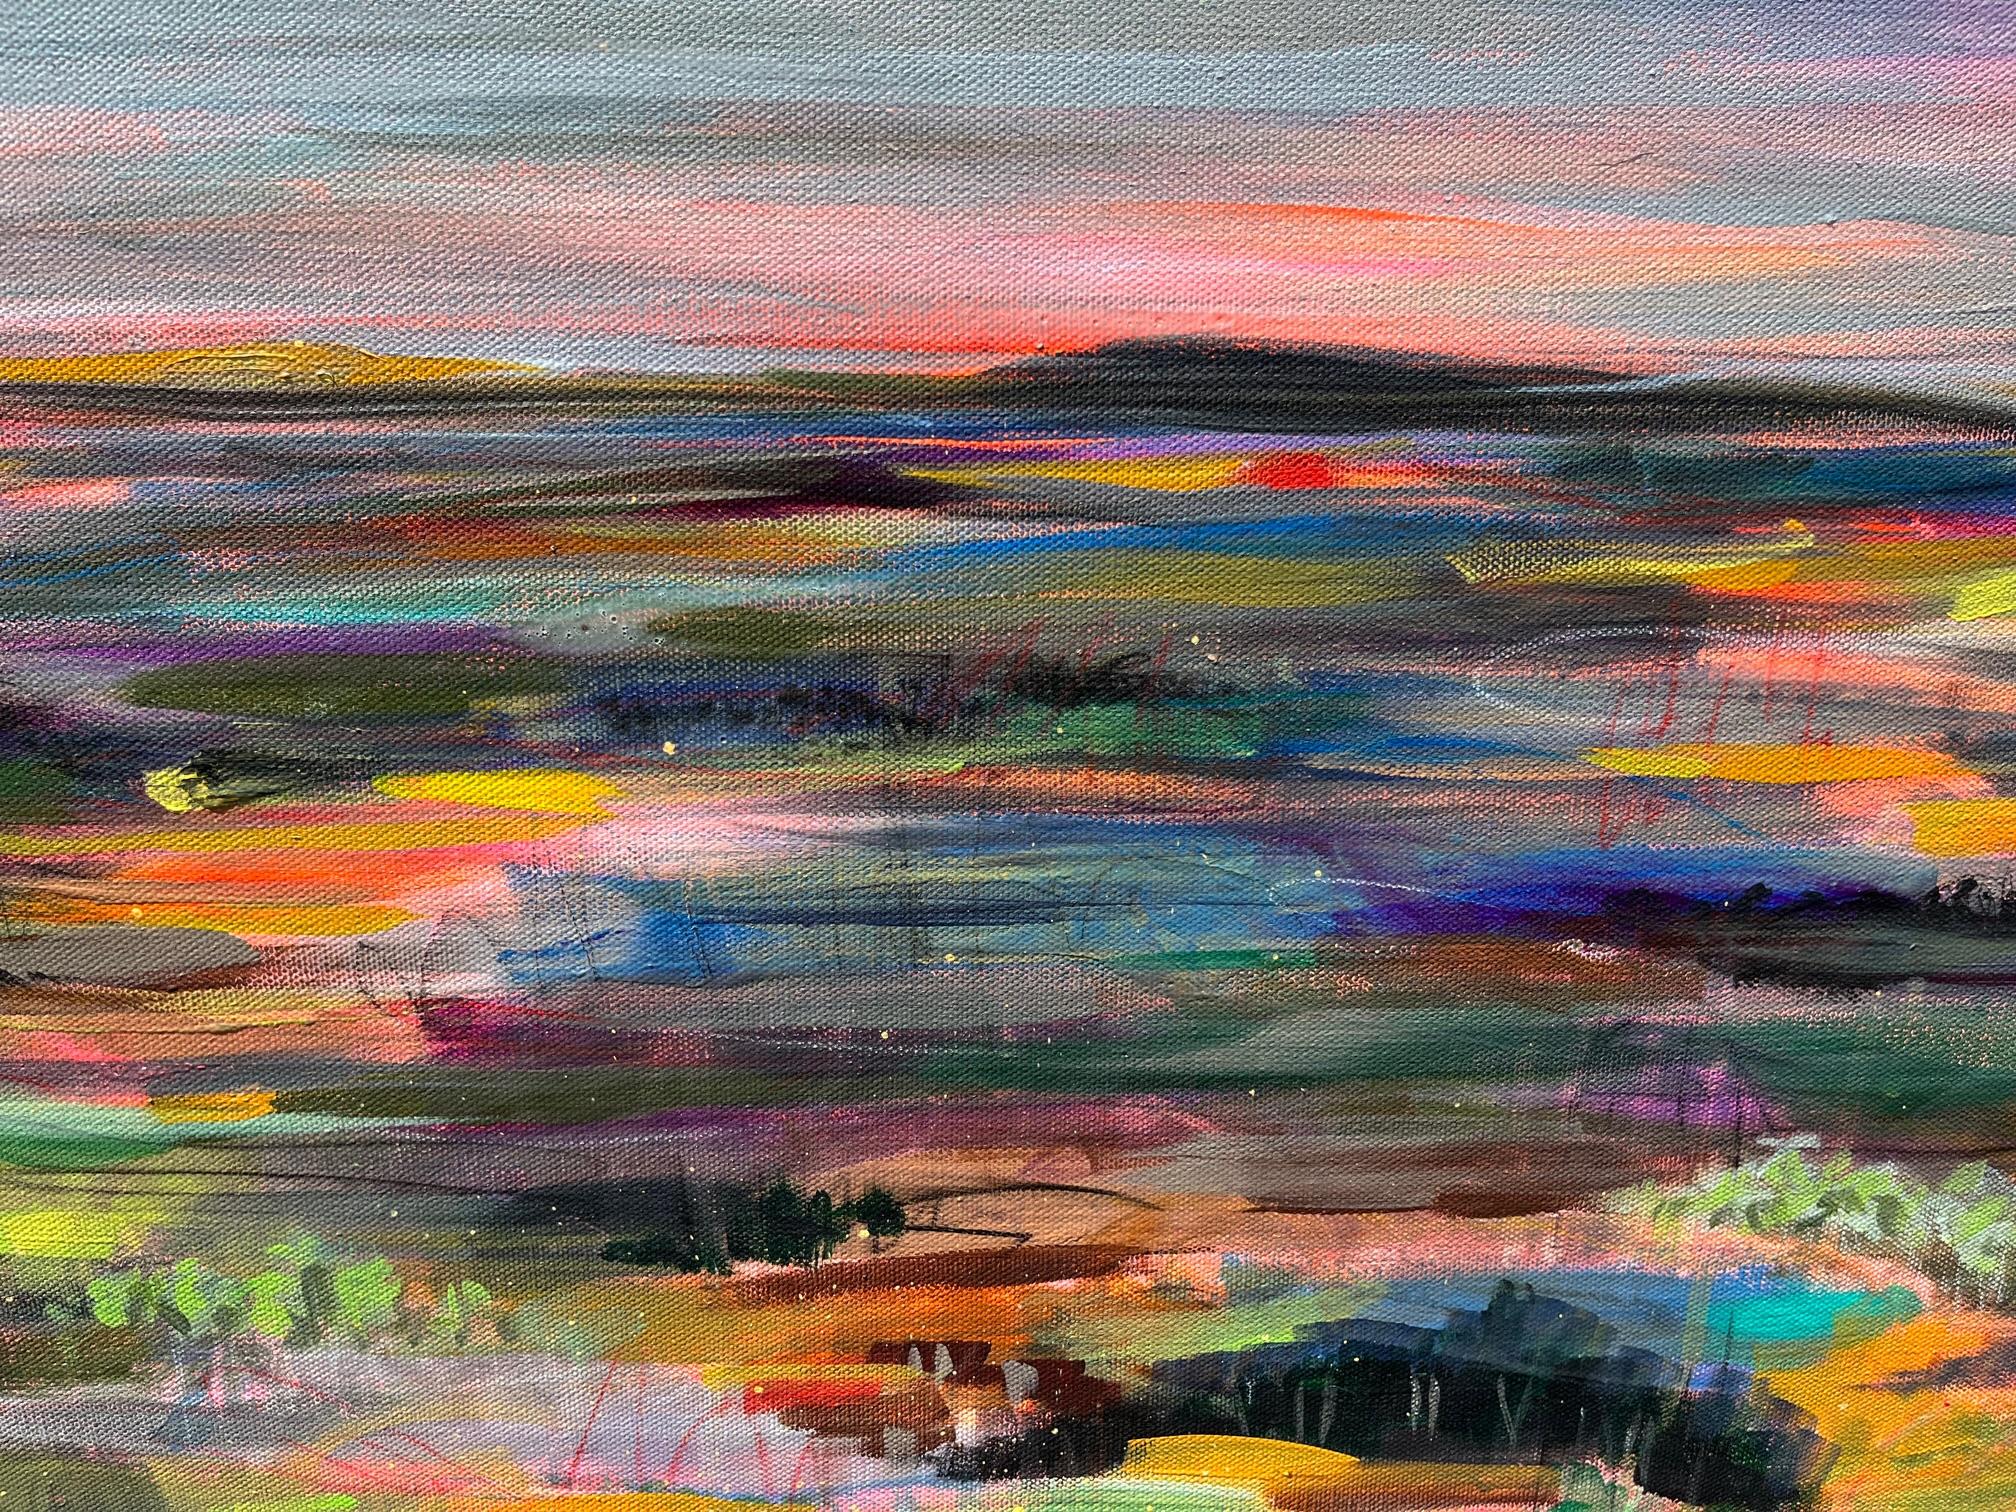 <p>Artist Comments<br>Artist Rebecca Klementovich depicts an expansive abstract fall landscape. She colors it with jewel tones with striking pink accents. A glow of warm colors complements and enhances her predominantly cool-toned work. Bits of